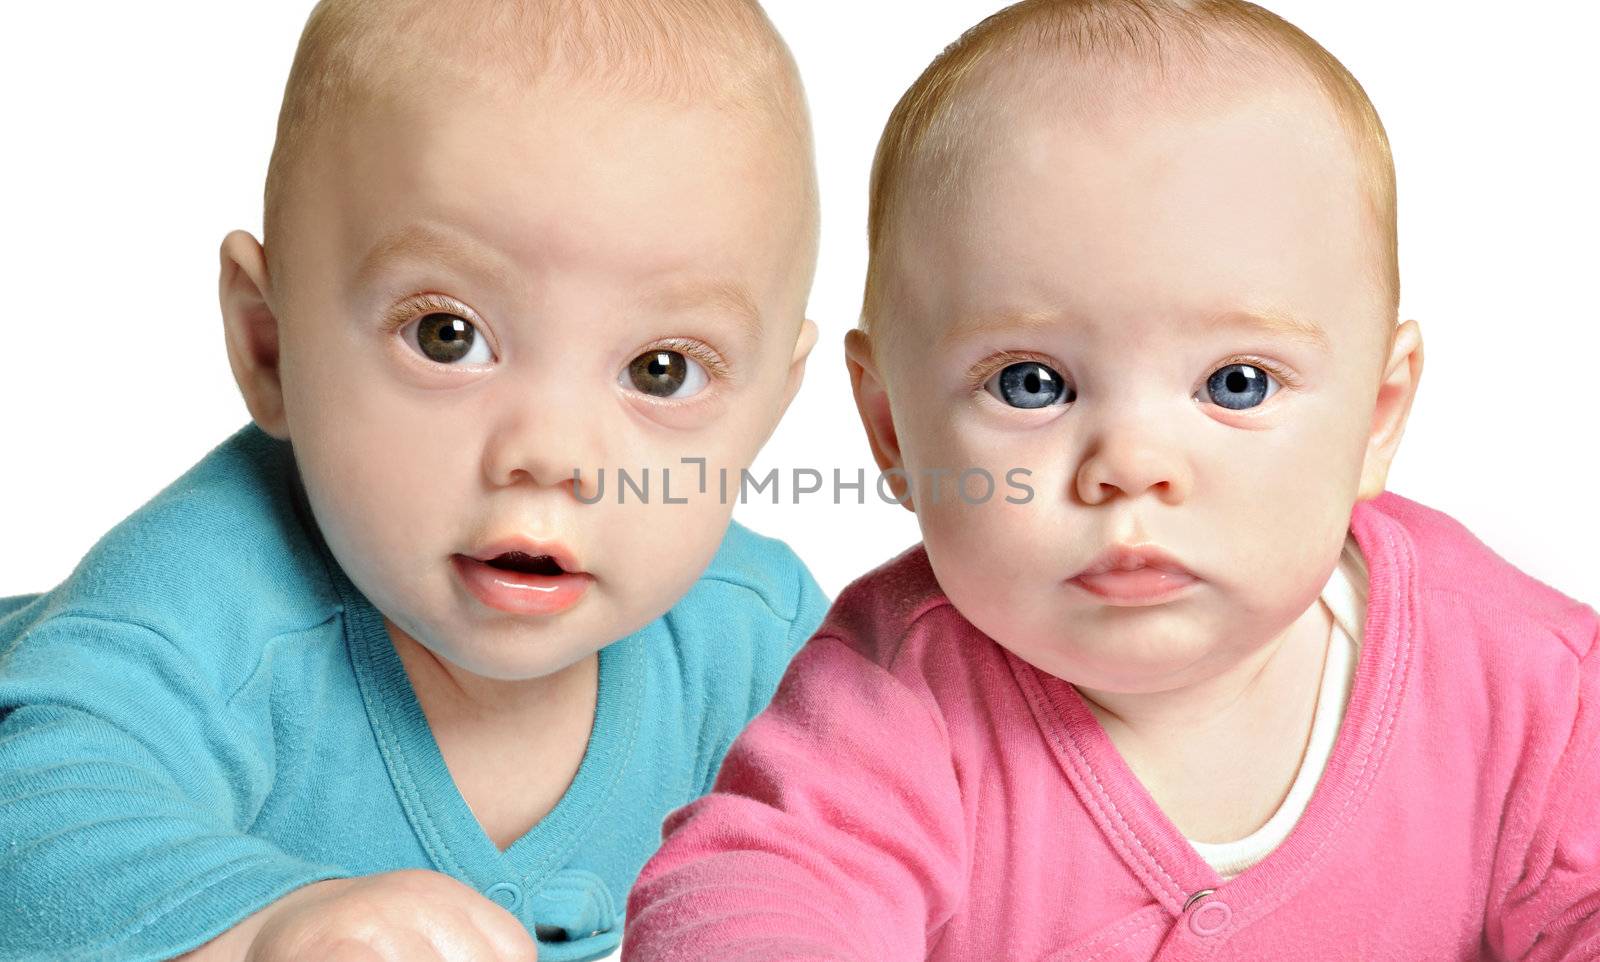 Six month old twin brother and sister on white